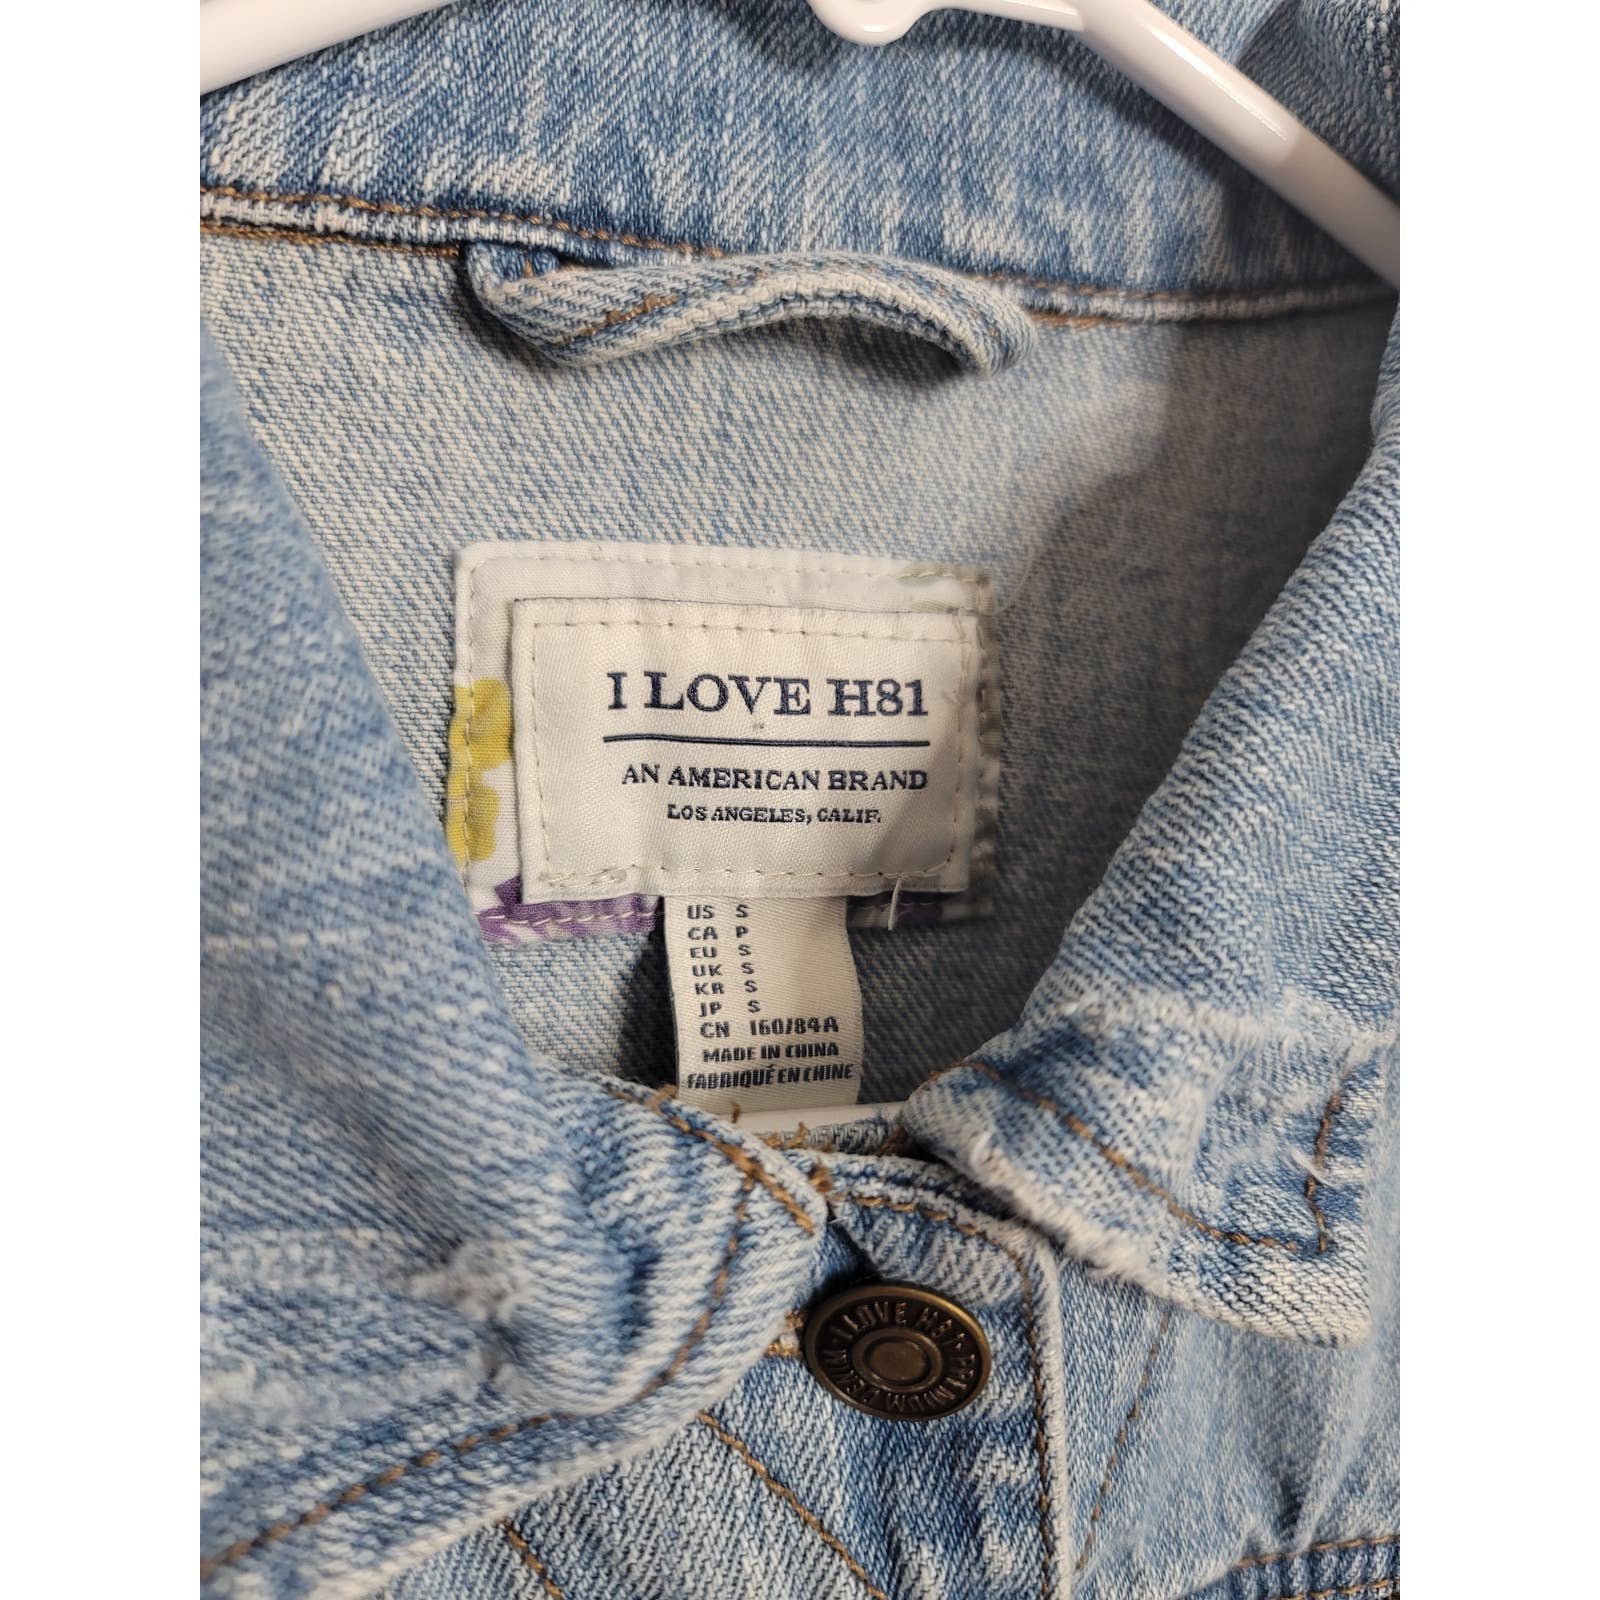 Simple I Love H81 Denim Jean Jacket Size Small ou9D2twhK Factory Price